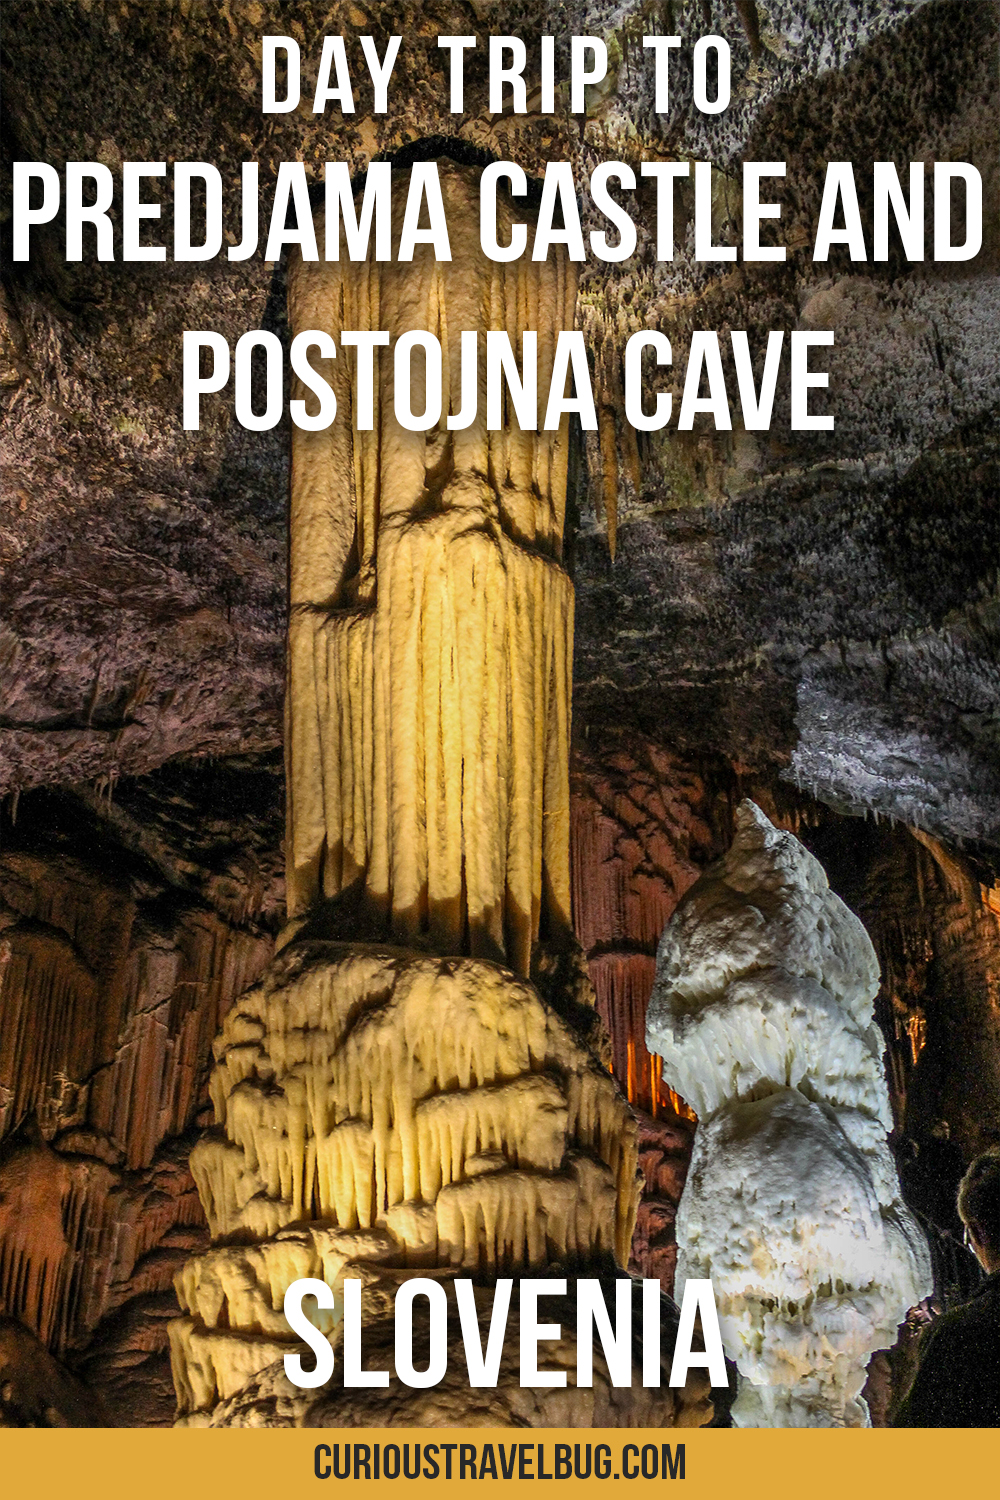 Day trip to one of Slovenia's top destinations, Predjama Castle and Postojna Caves. The caves are one of the best caves in Europe while the castle is unique in being built into a cave and having secret passageways.